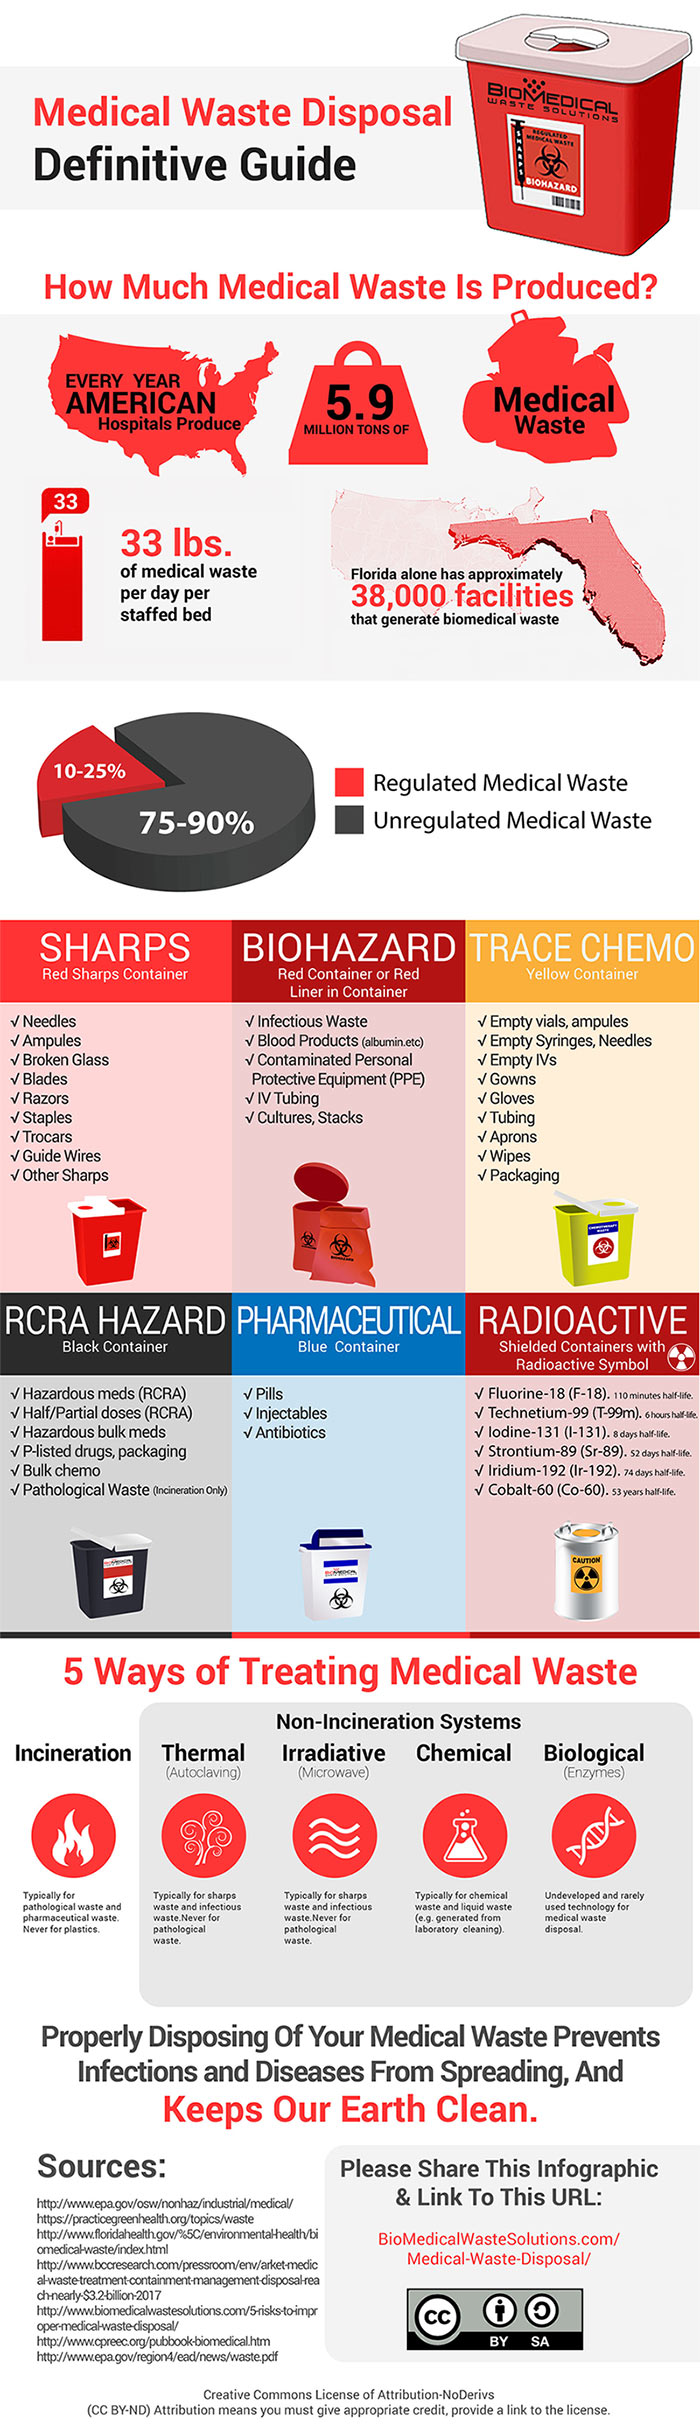 Medical Waste Disposal Definitive Guide Infographic